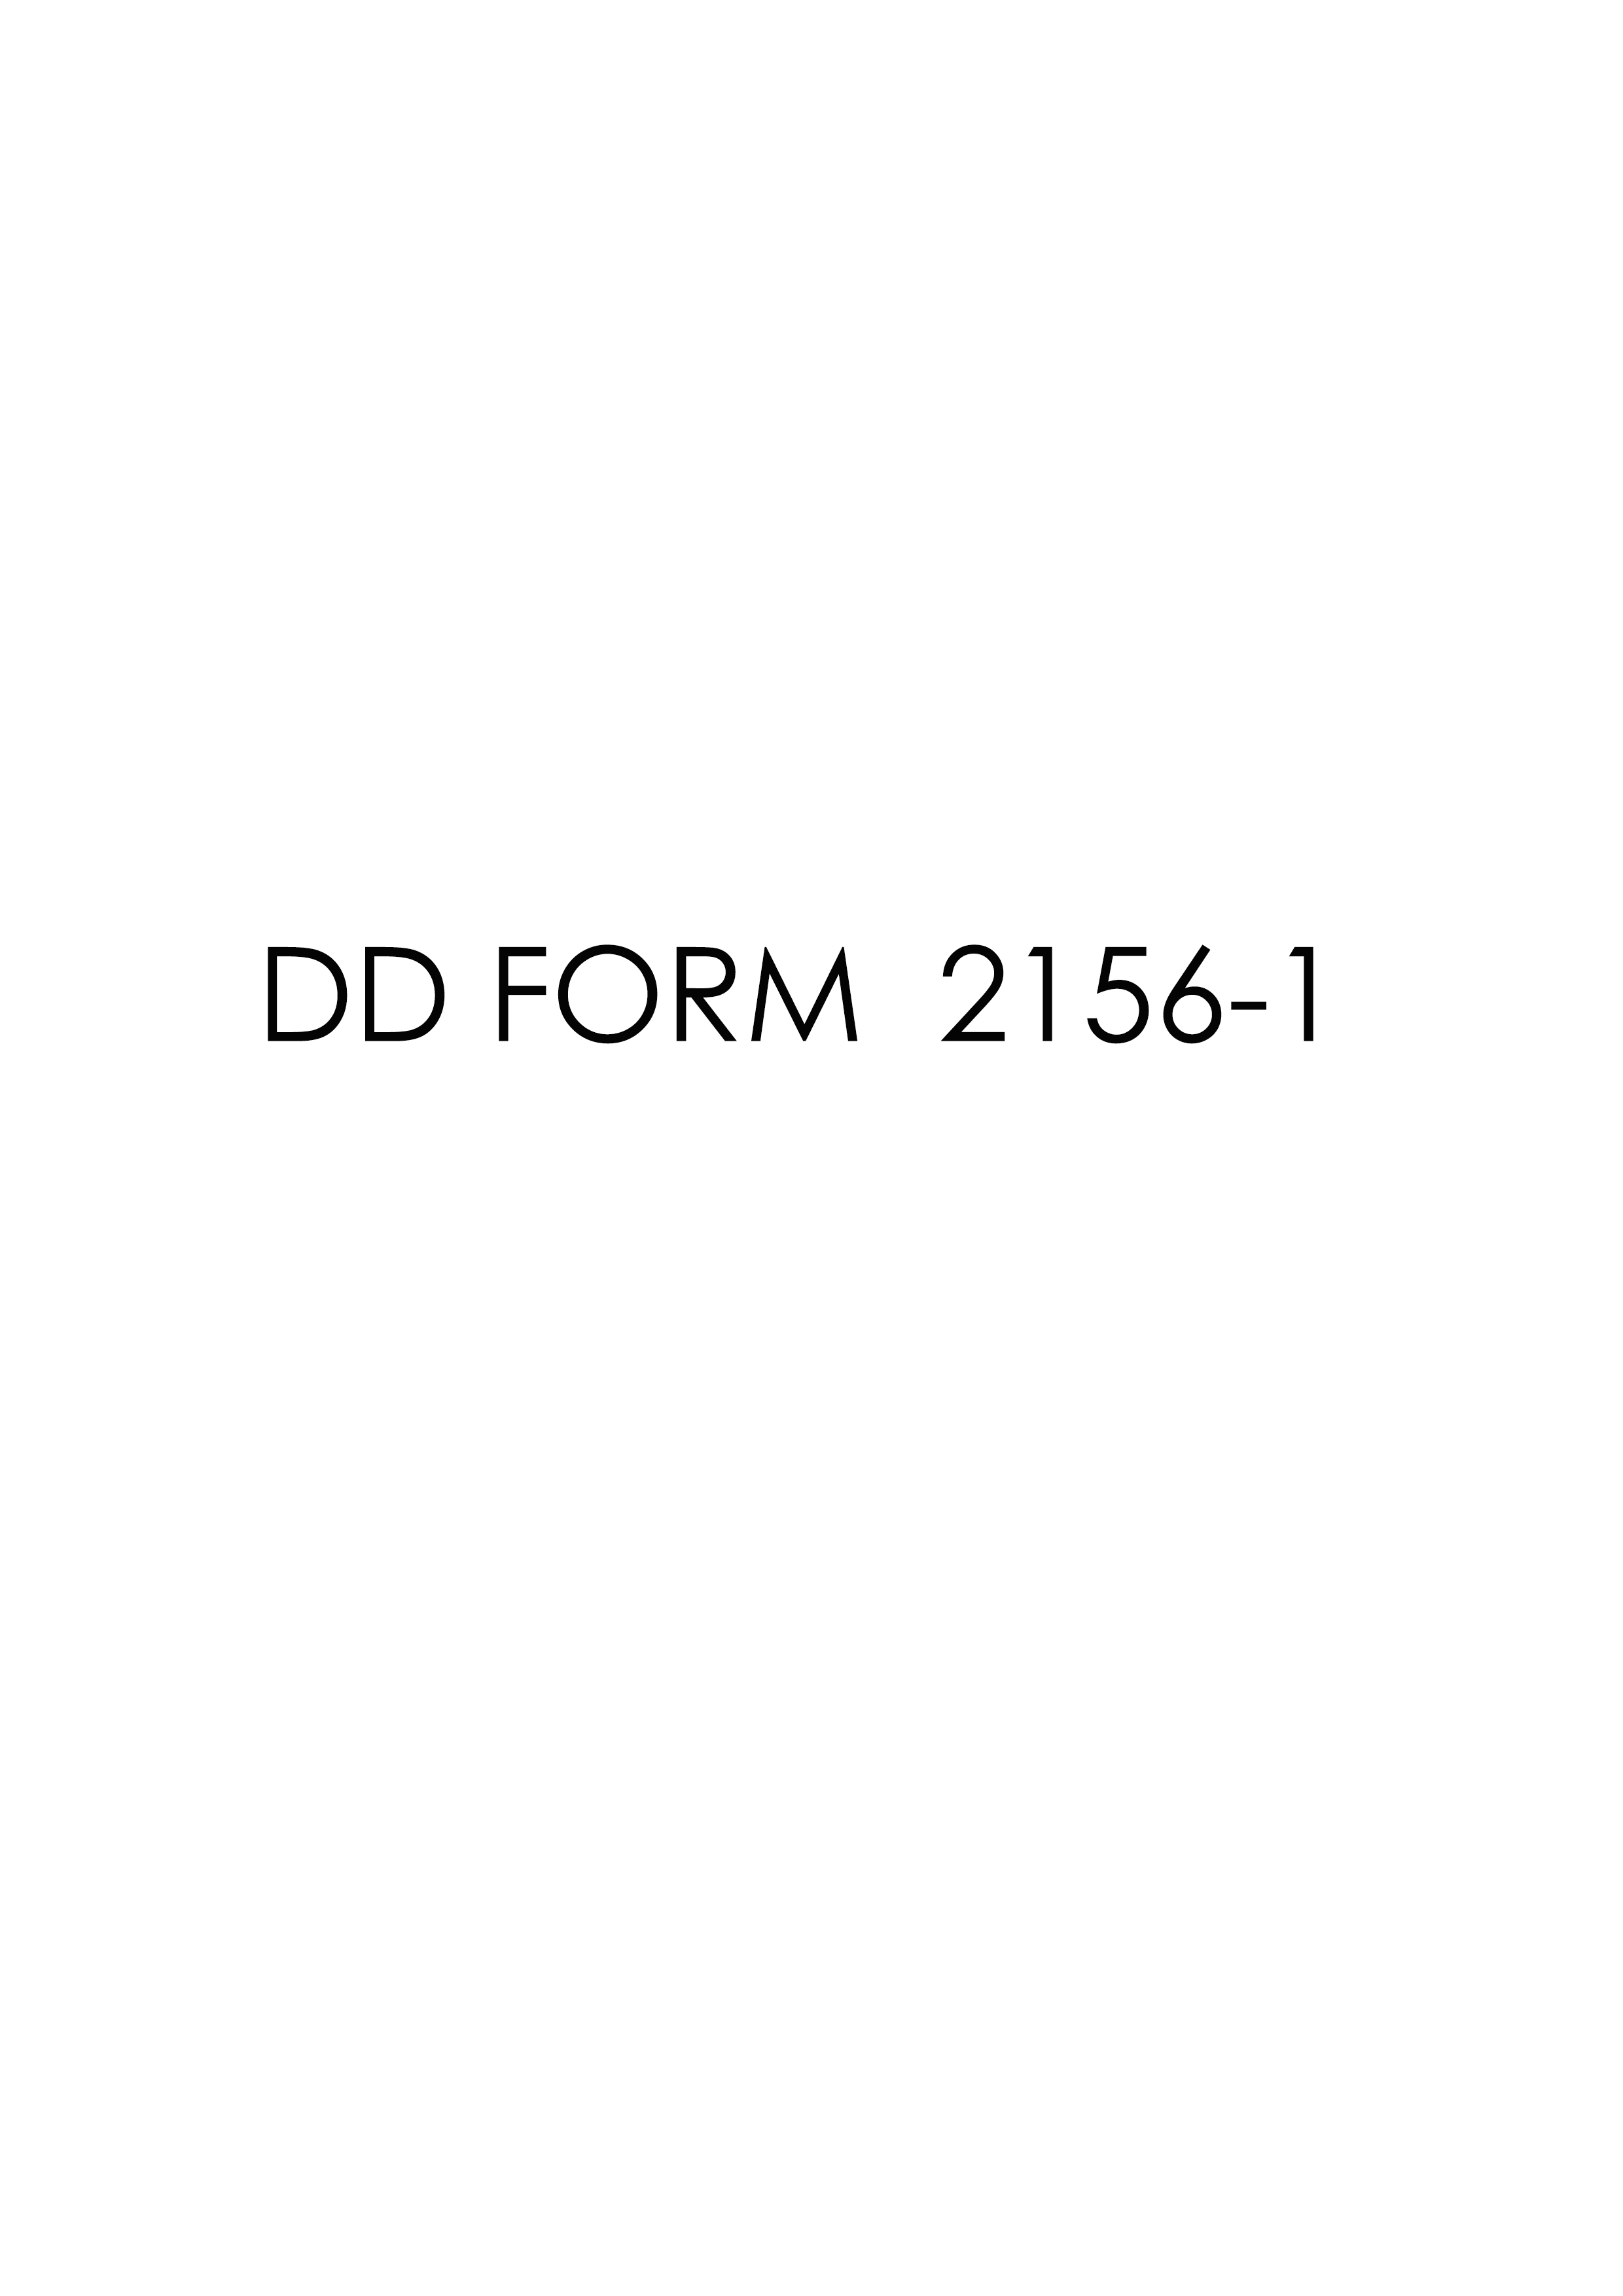 Download Fillable dd Form 2156-1